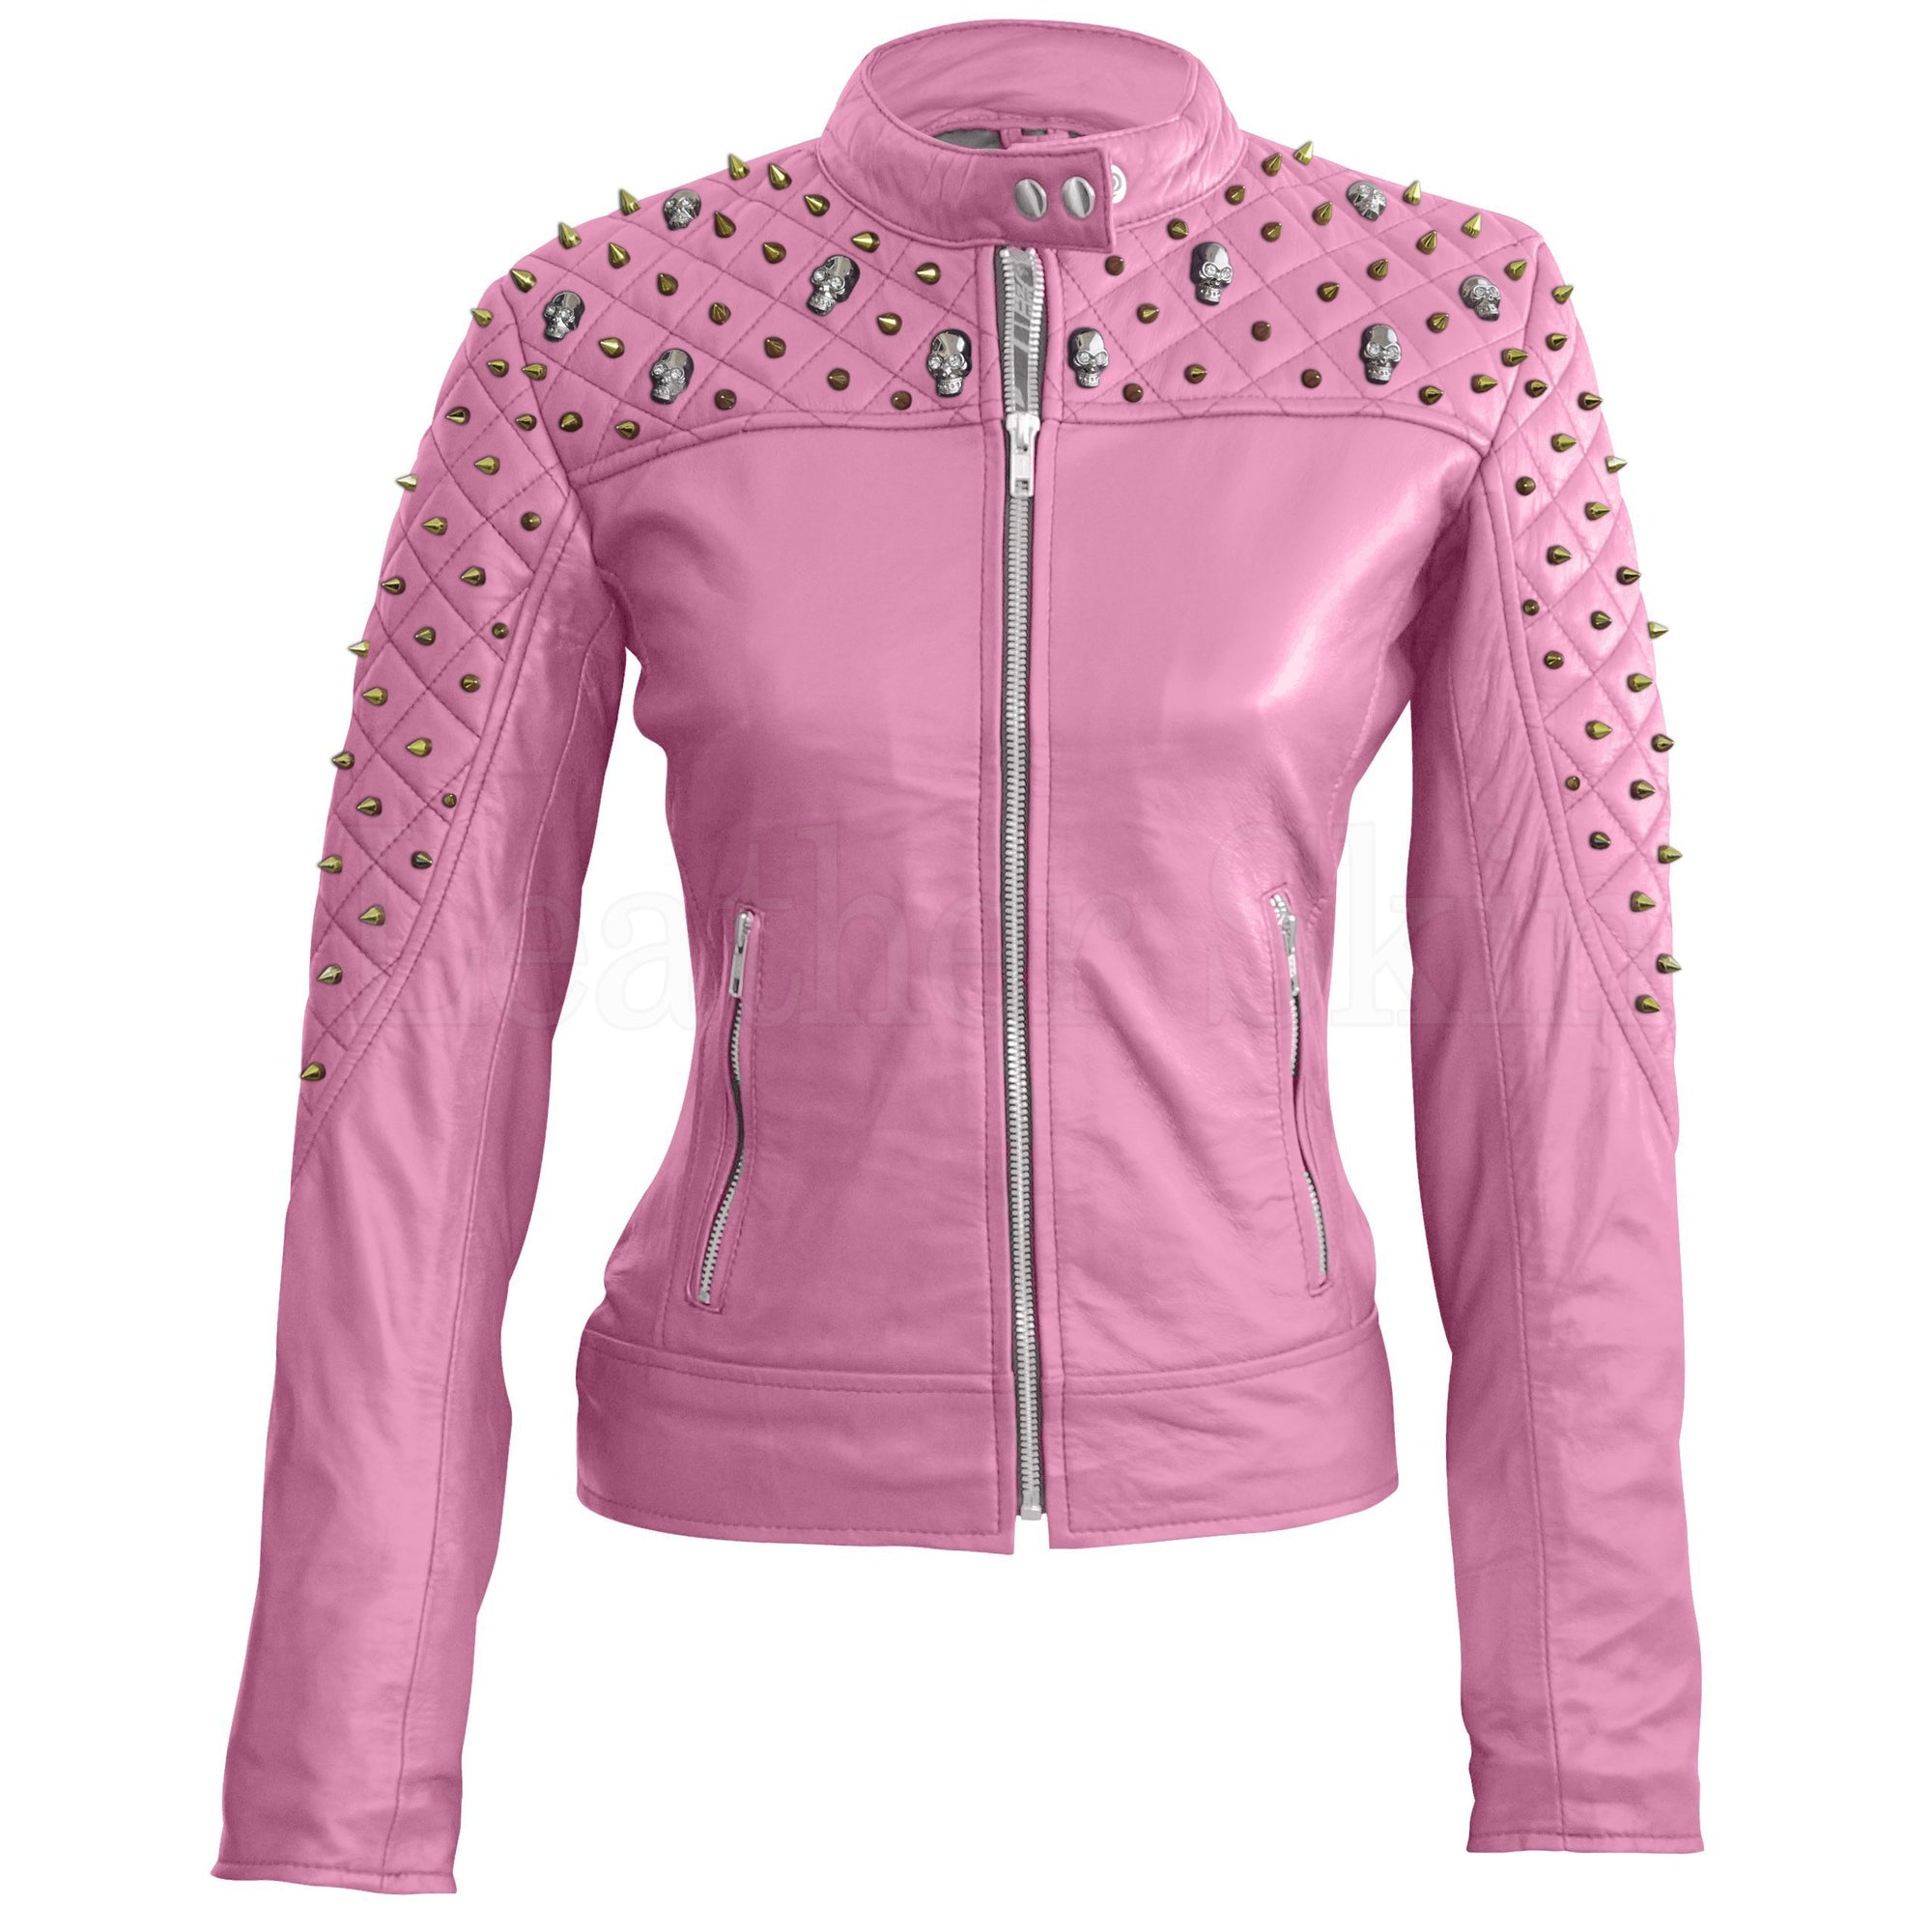 https://leatherskinshop.com/products/leather-skin-women-pink-quilted-gold-studded-skeletons-genuine-leather-jacket